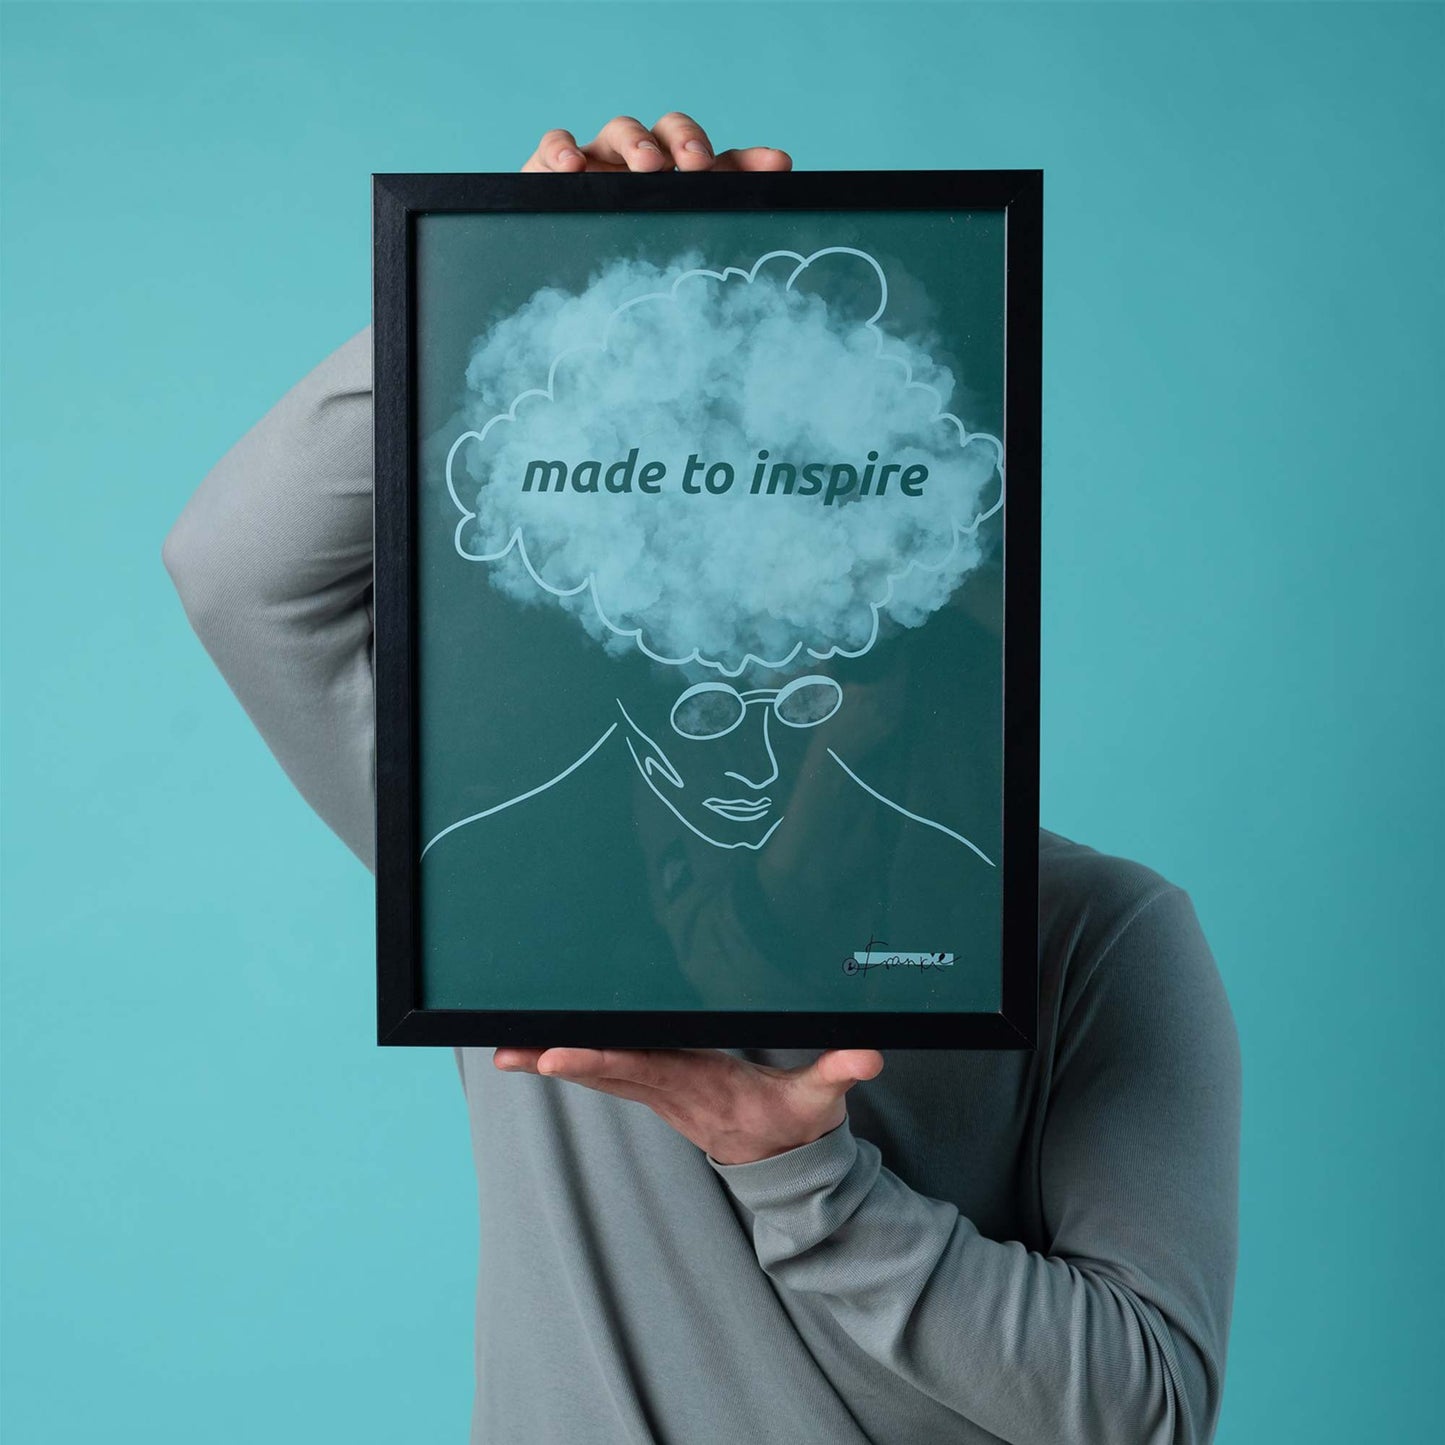 "Made to inspire" poster